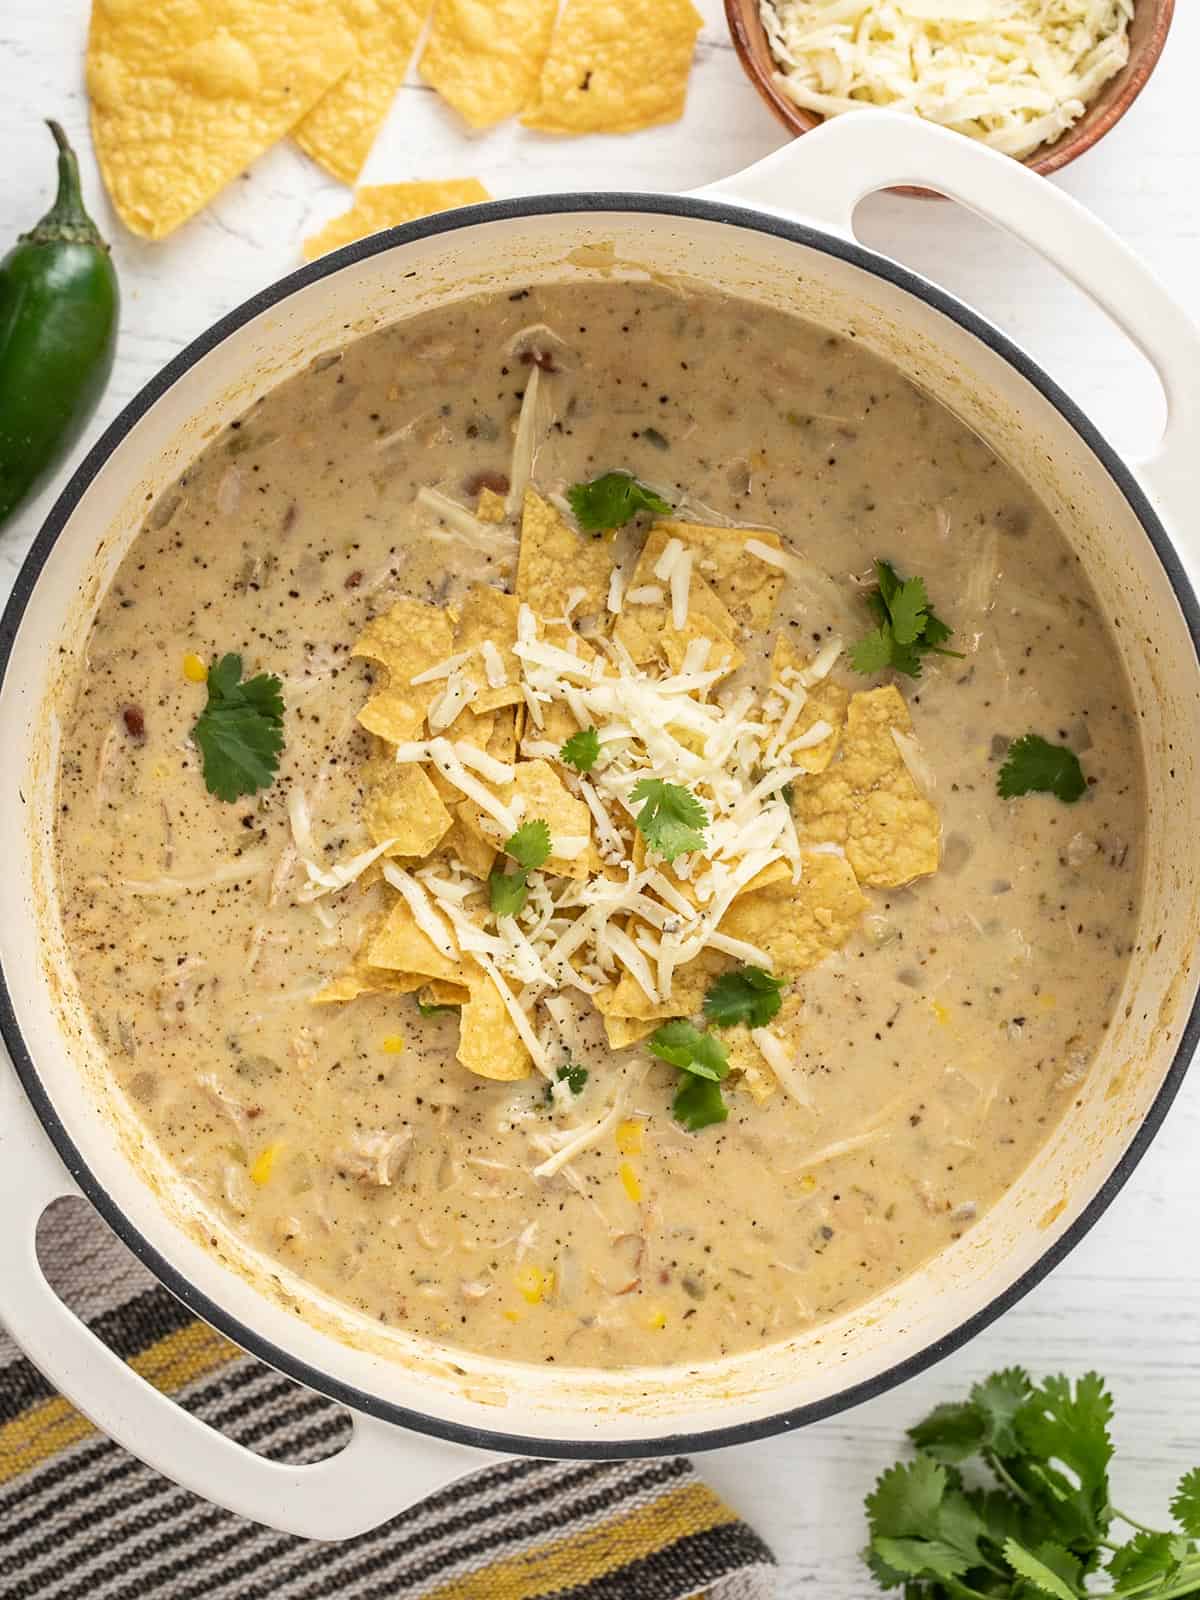 White chicken chili in the pot topped with cheese, tortilla chips, and cilantro.